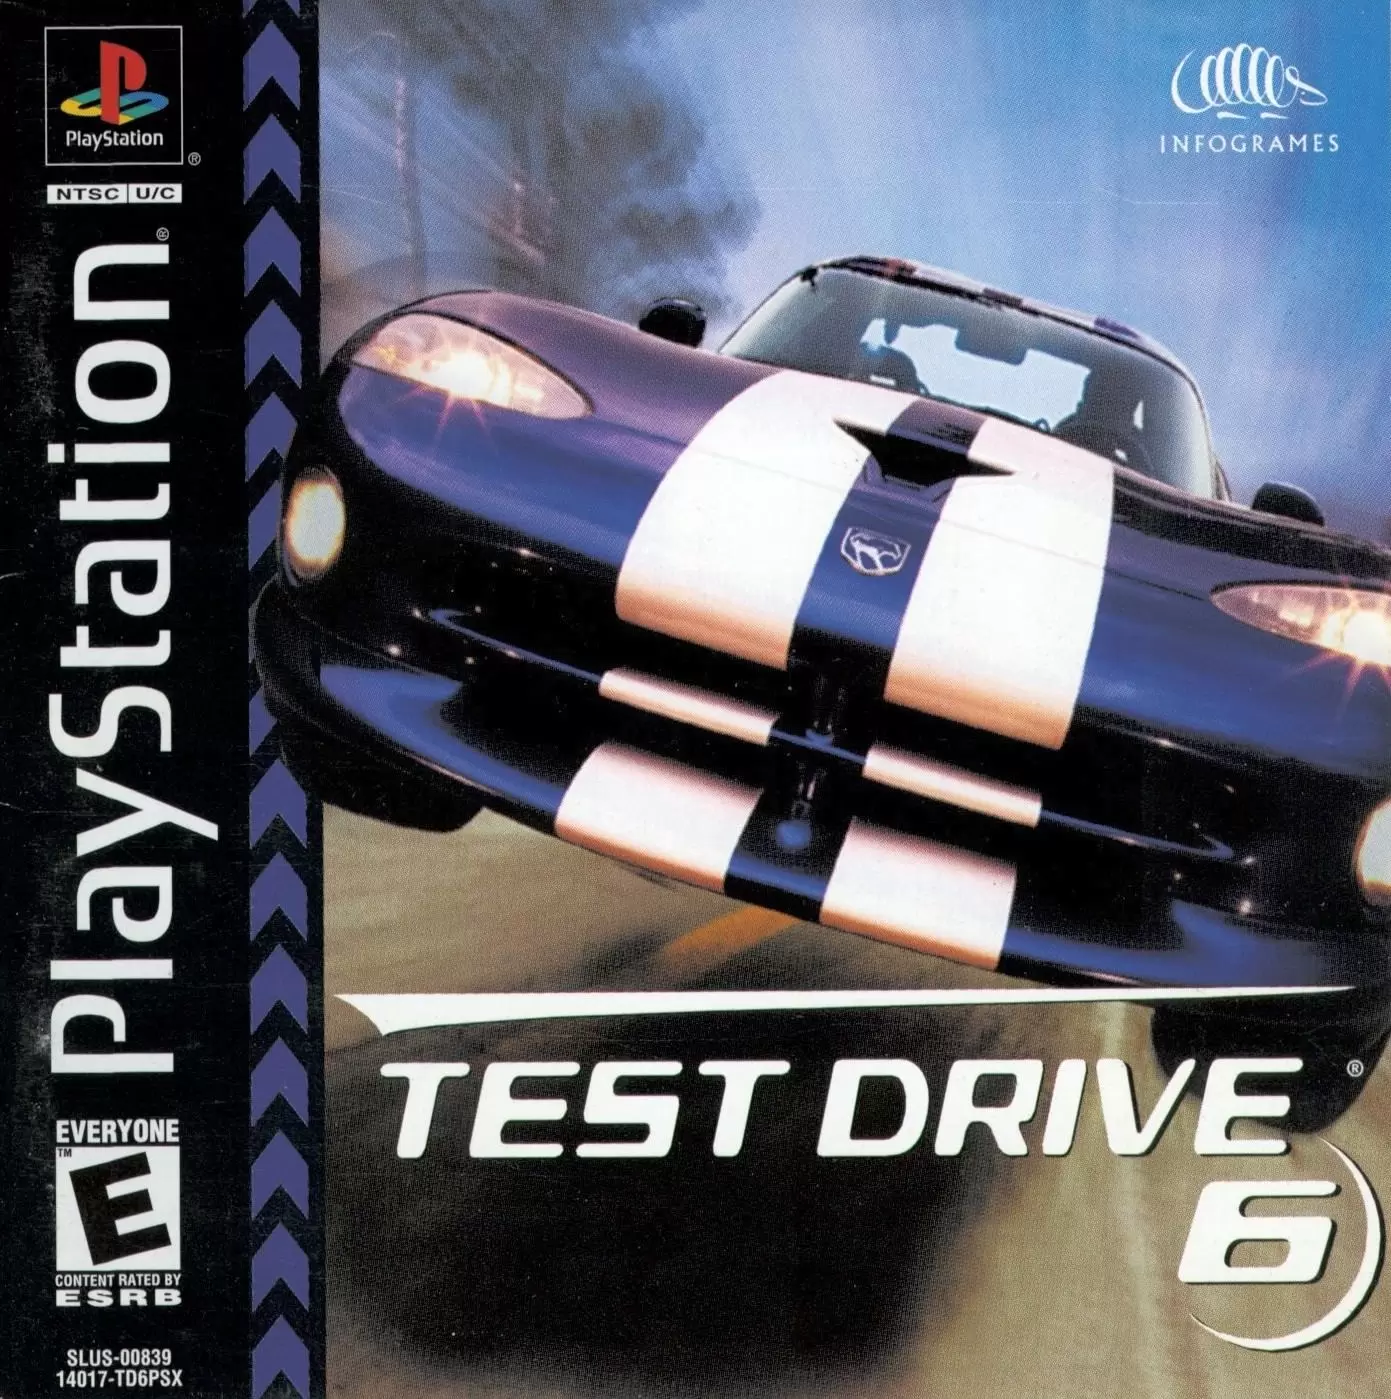 Playstation games - Test Drive 6